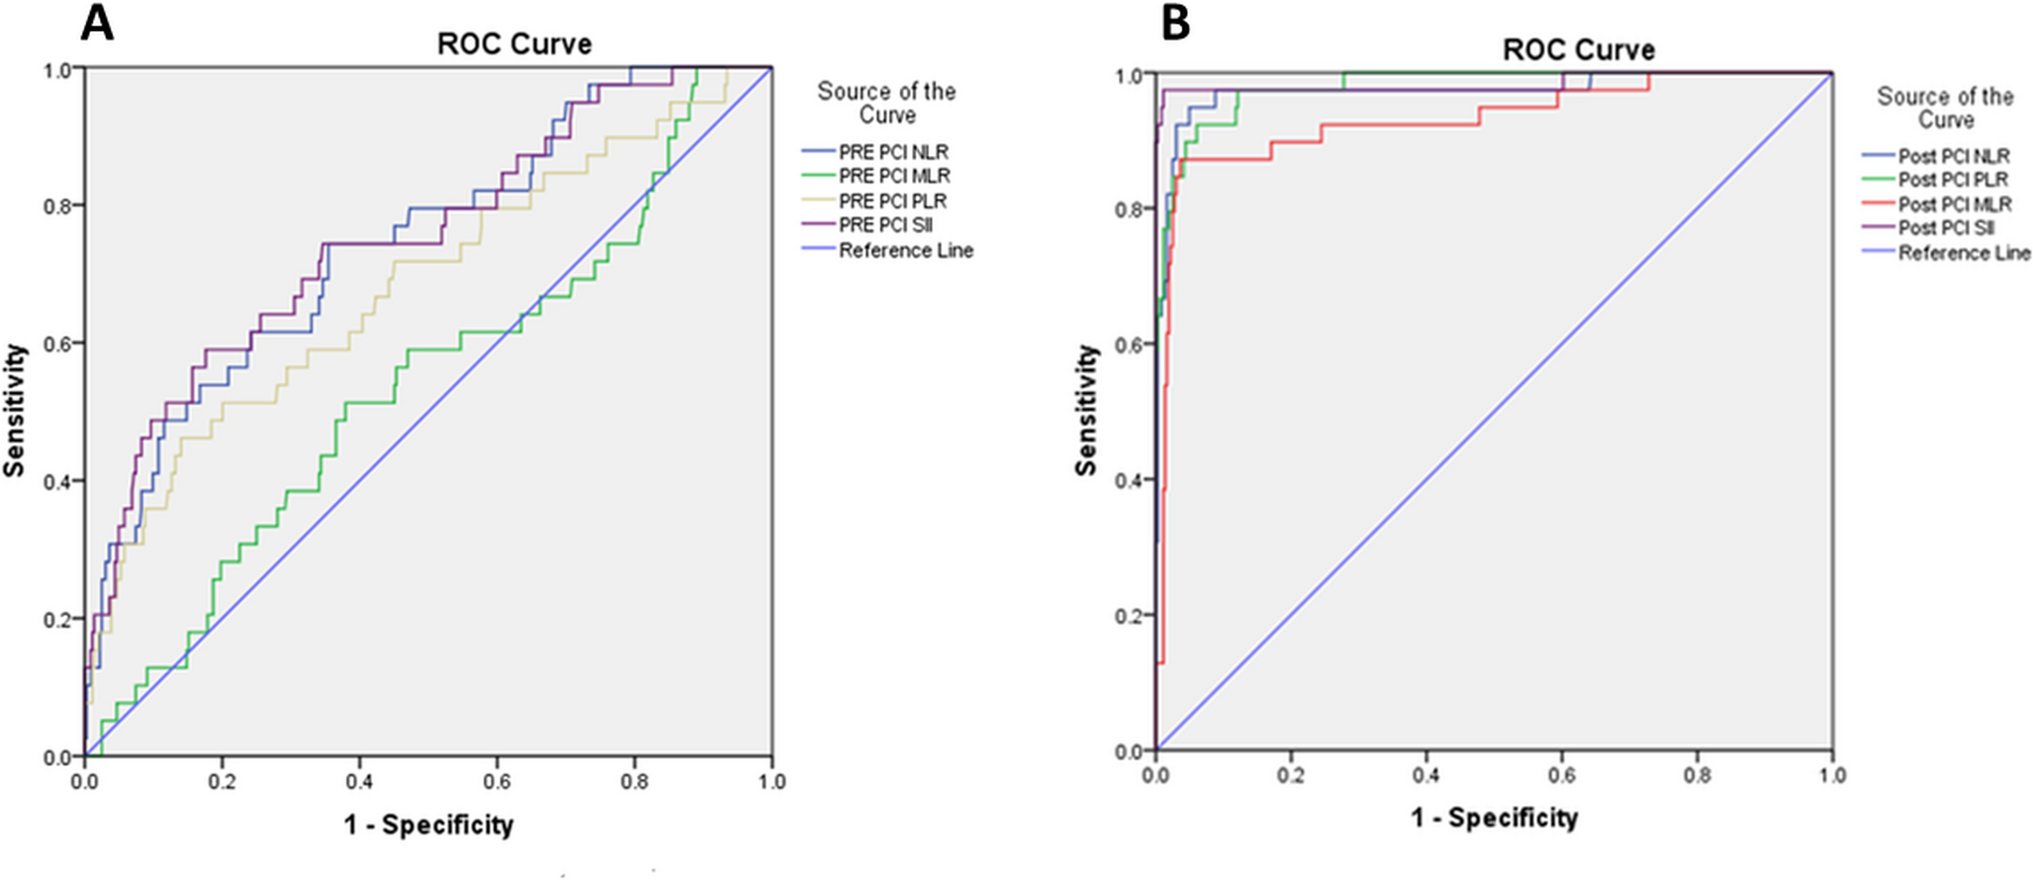 Predictive Value of Lymphocyte Based Indices to Determine Major Adverse Cardiovascular Events in Acute Coronary Syndrome Undergoing Percutaneous Coronary Intervention